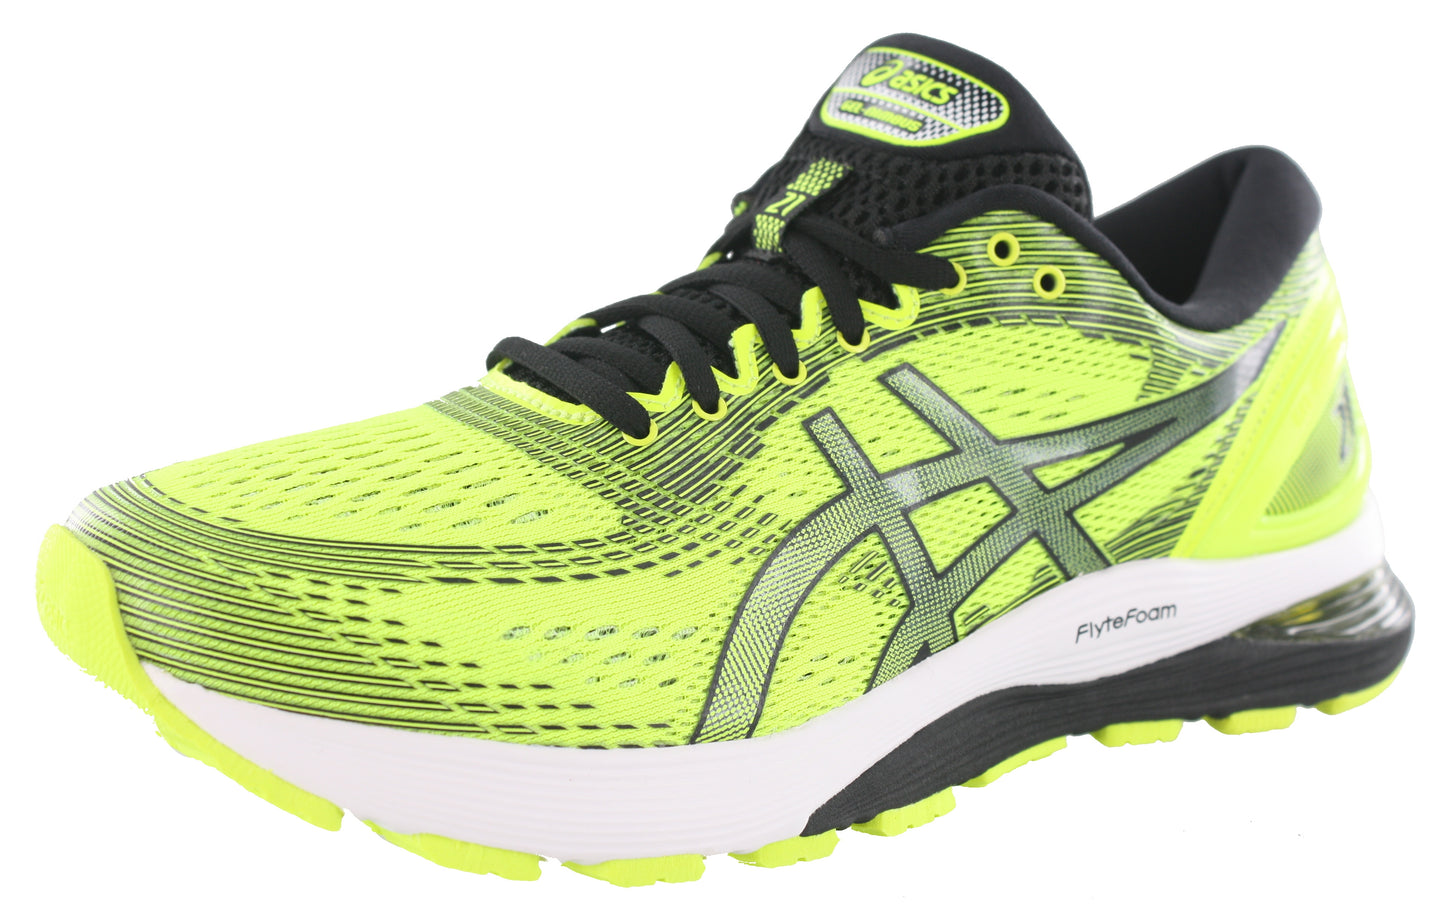 Lateral of Safety Yellow/Black ASICS Men Walking Trail Cushioned Running Shoes Gel Nimbus 21